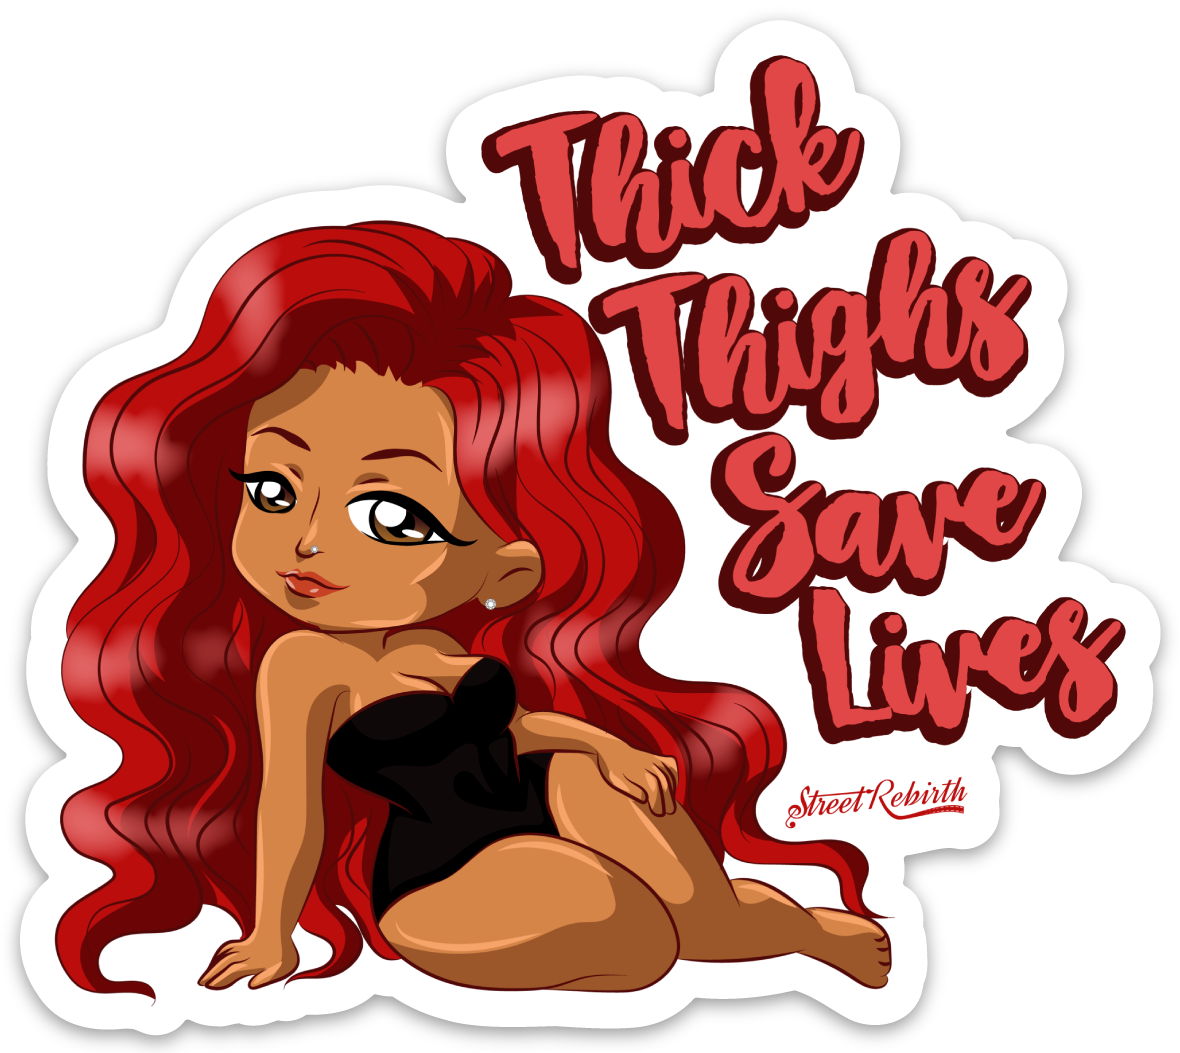 Thick Thighs Save Lives PUN STICKER – ONE 4 INCH WATER PROOF VINYL STICKER – FOR HYDRO FLASK, SKATEBOARD, LAPTOP, PLANNER, CAR, COLLECTING, GIFTING